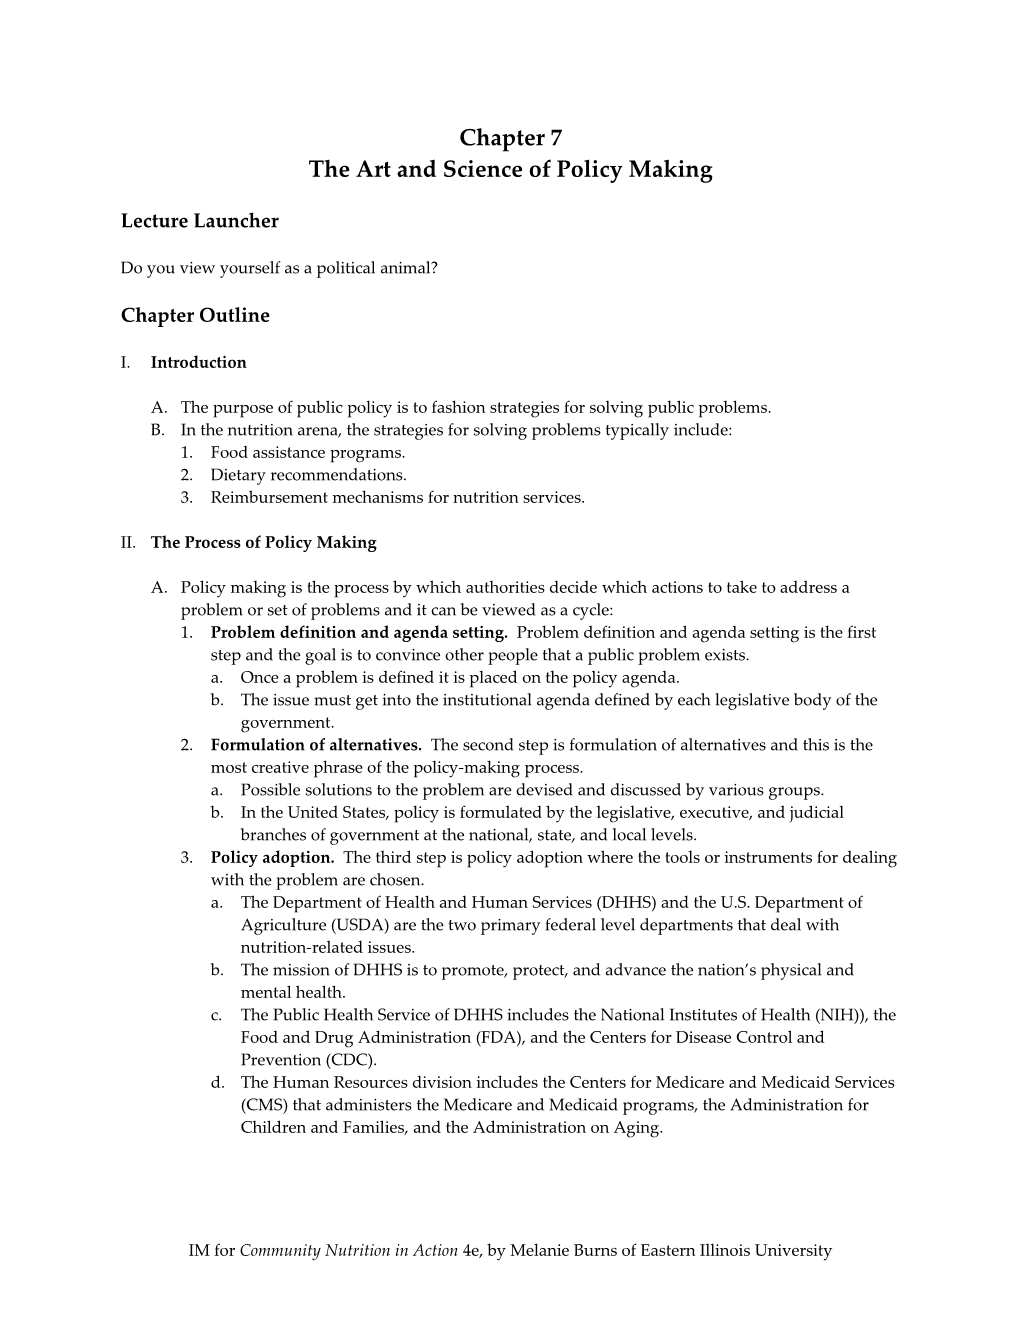 The Art and Science of Policy Making